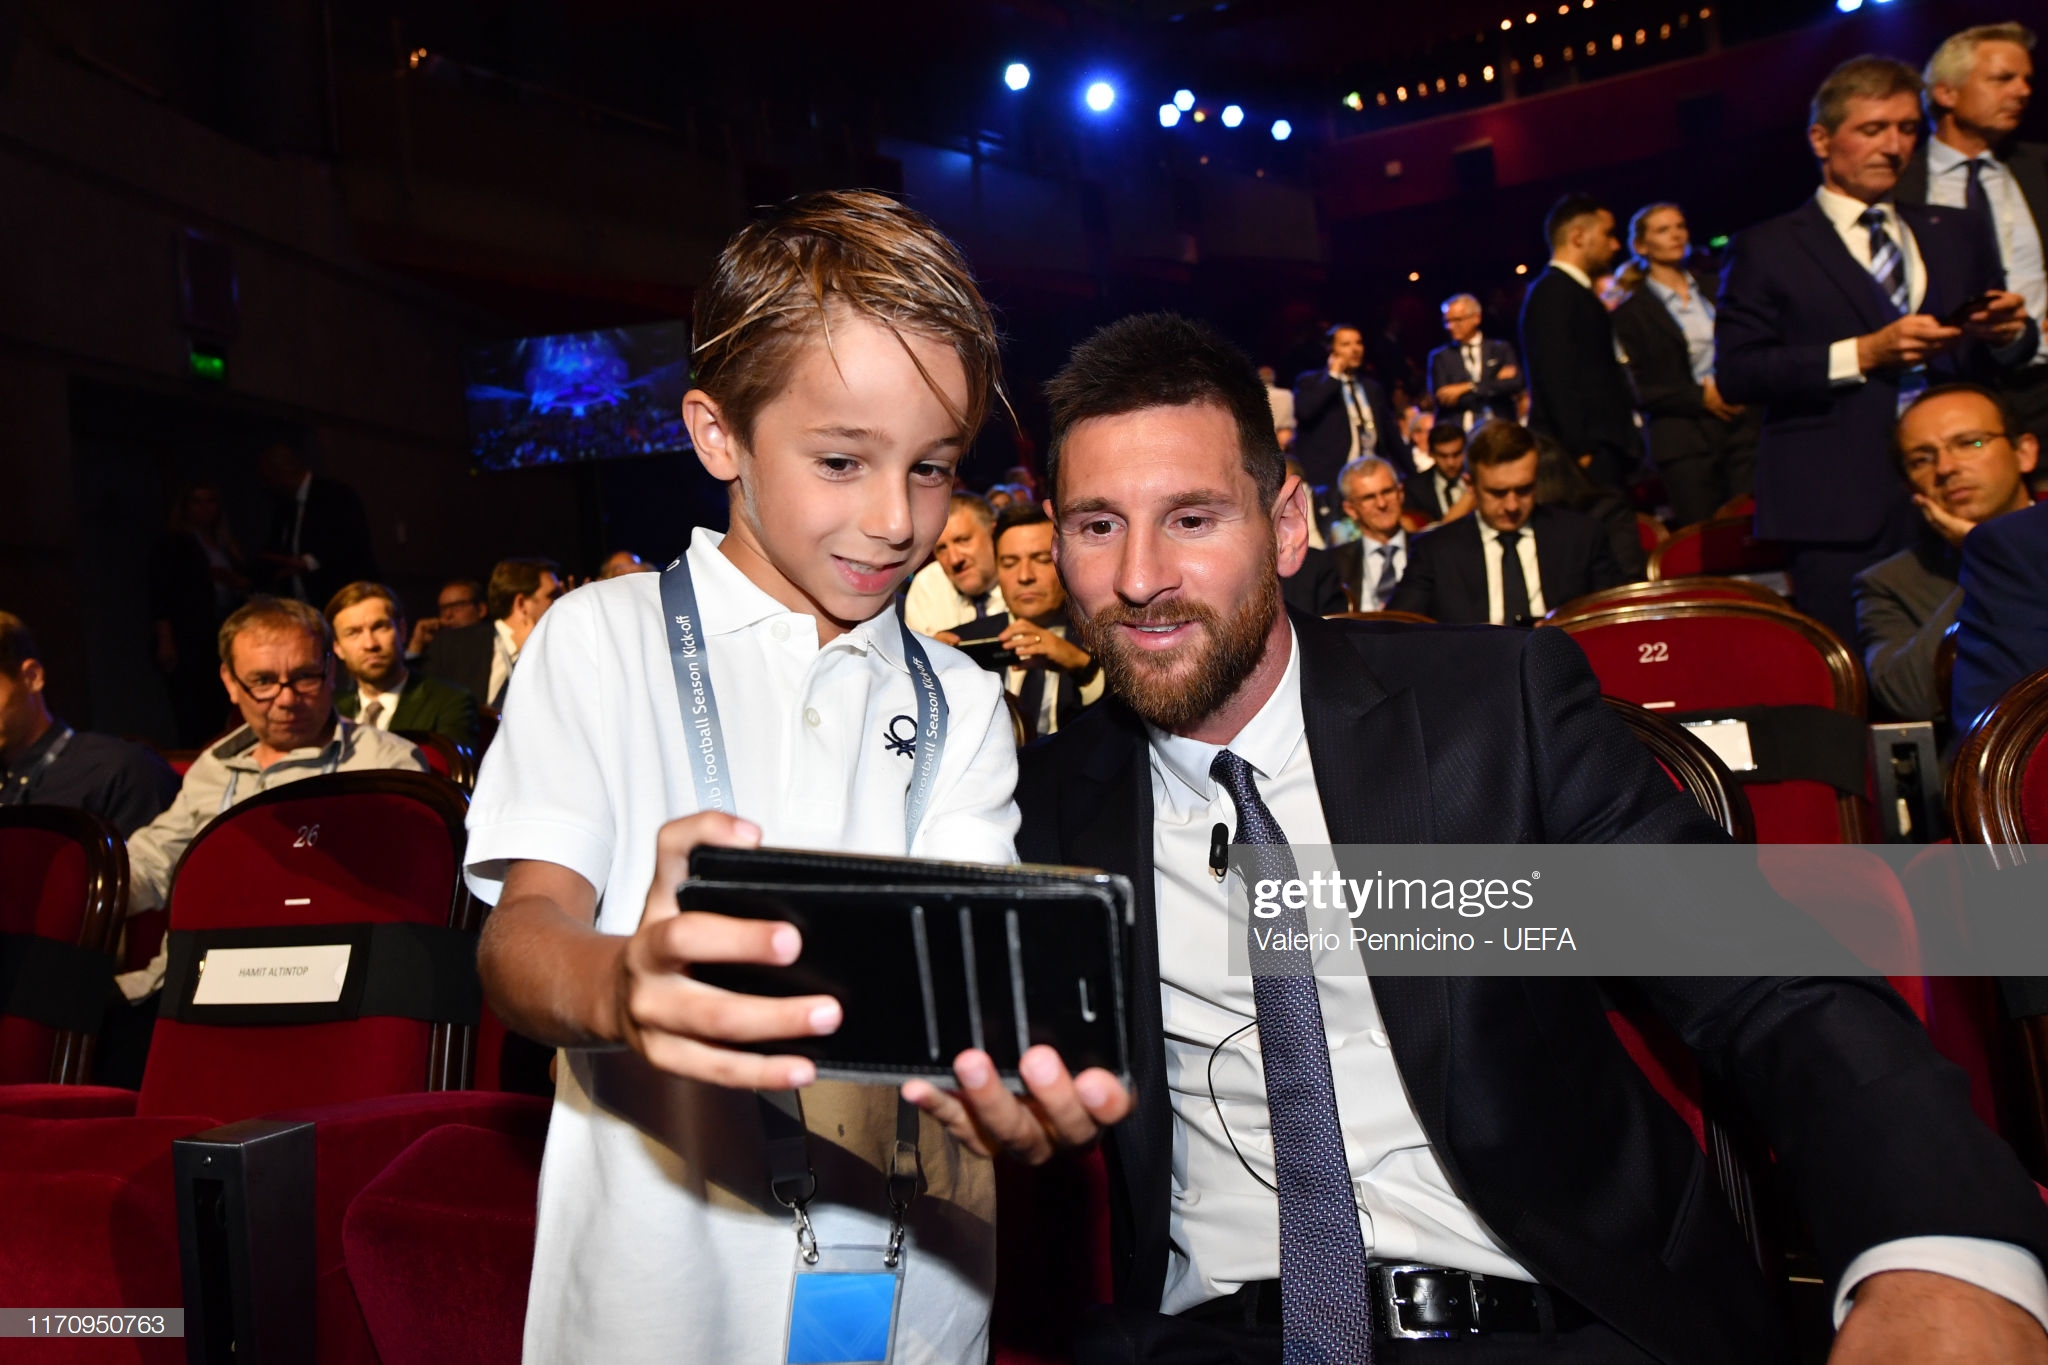 gettyimages-1170950763-2048x2048.jpg